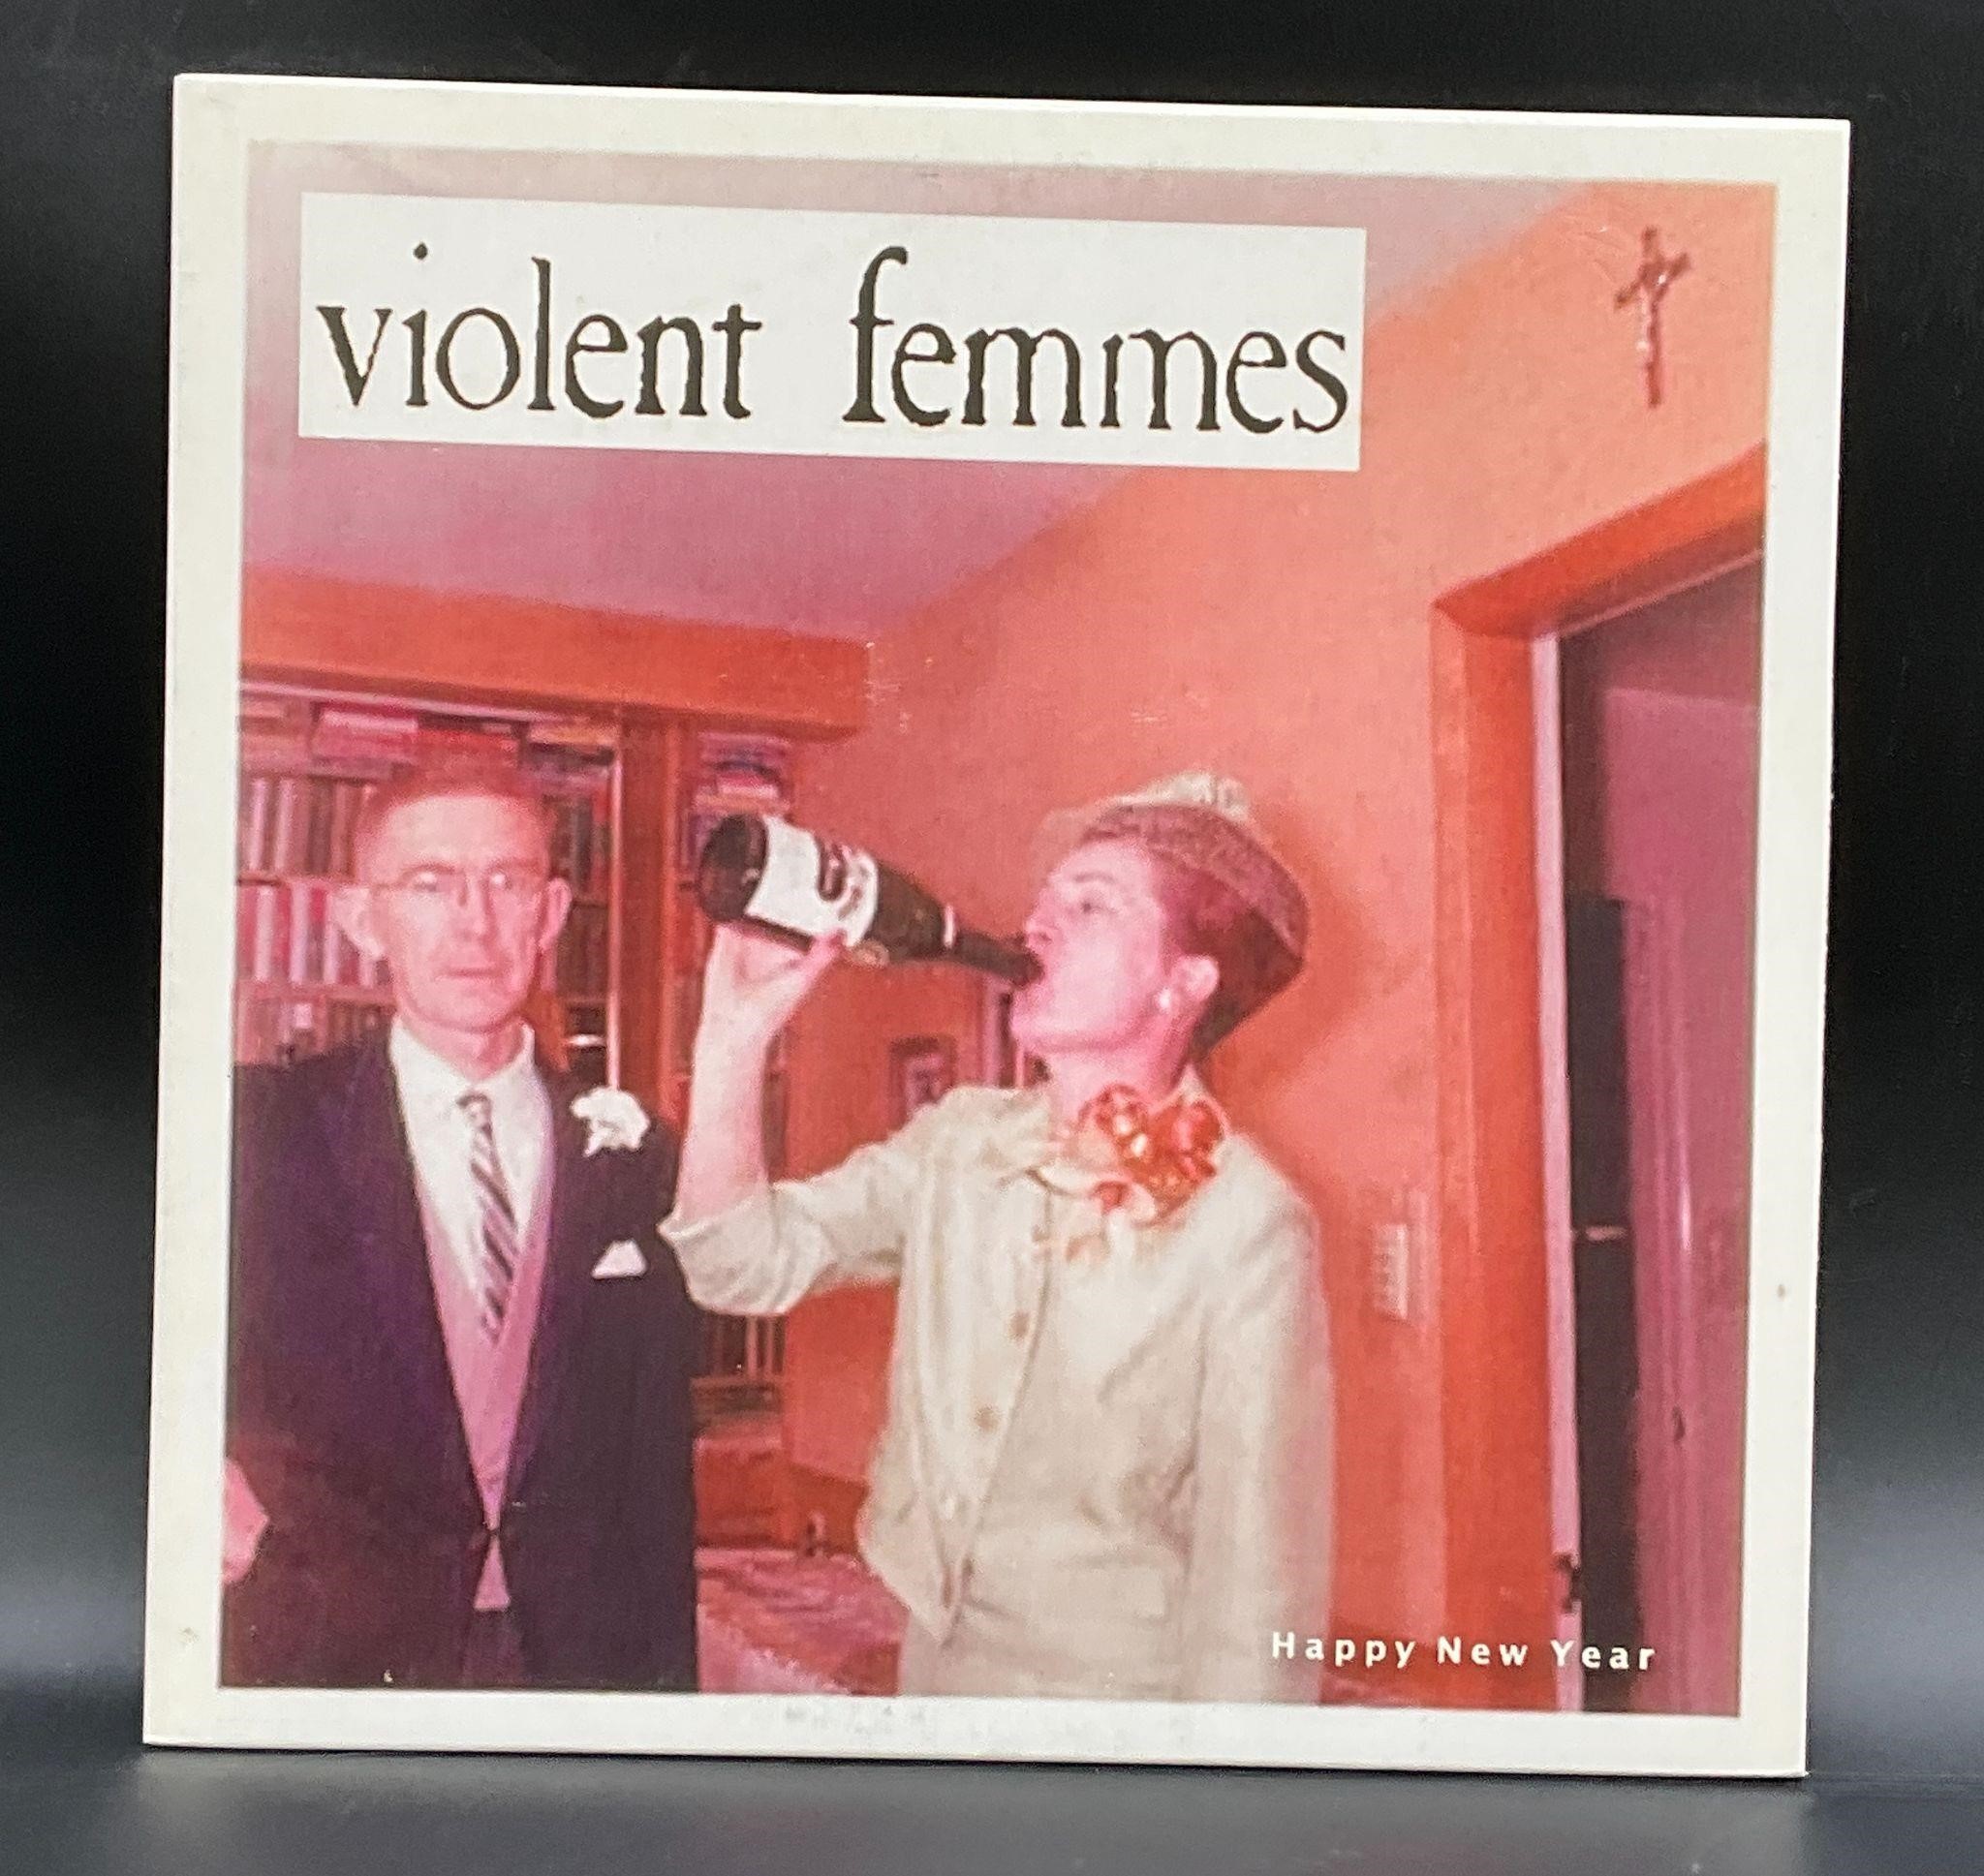 2015 RSD Violent Femmes "Happy New Year" EP